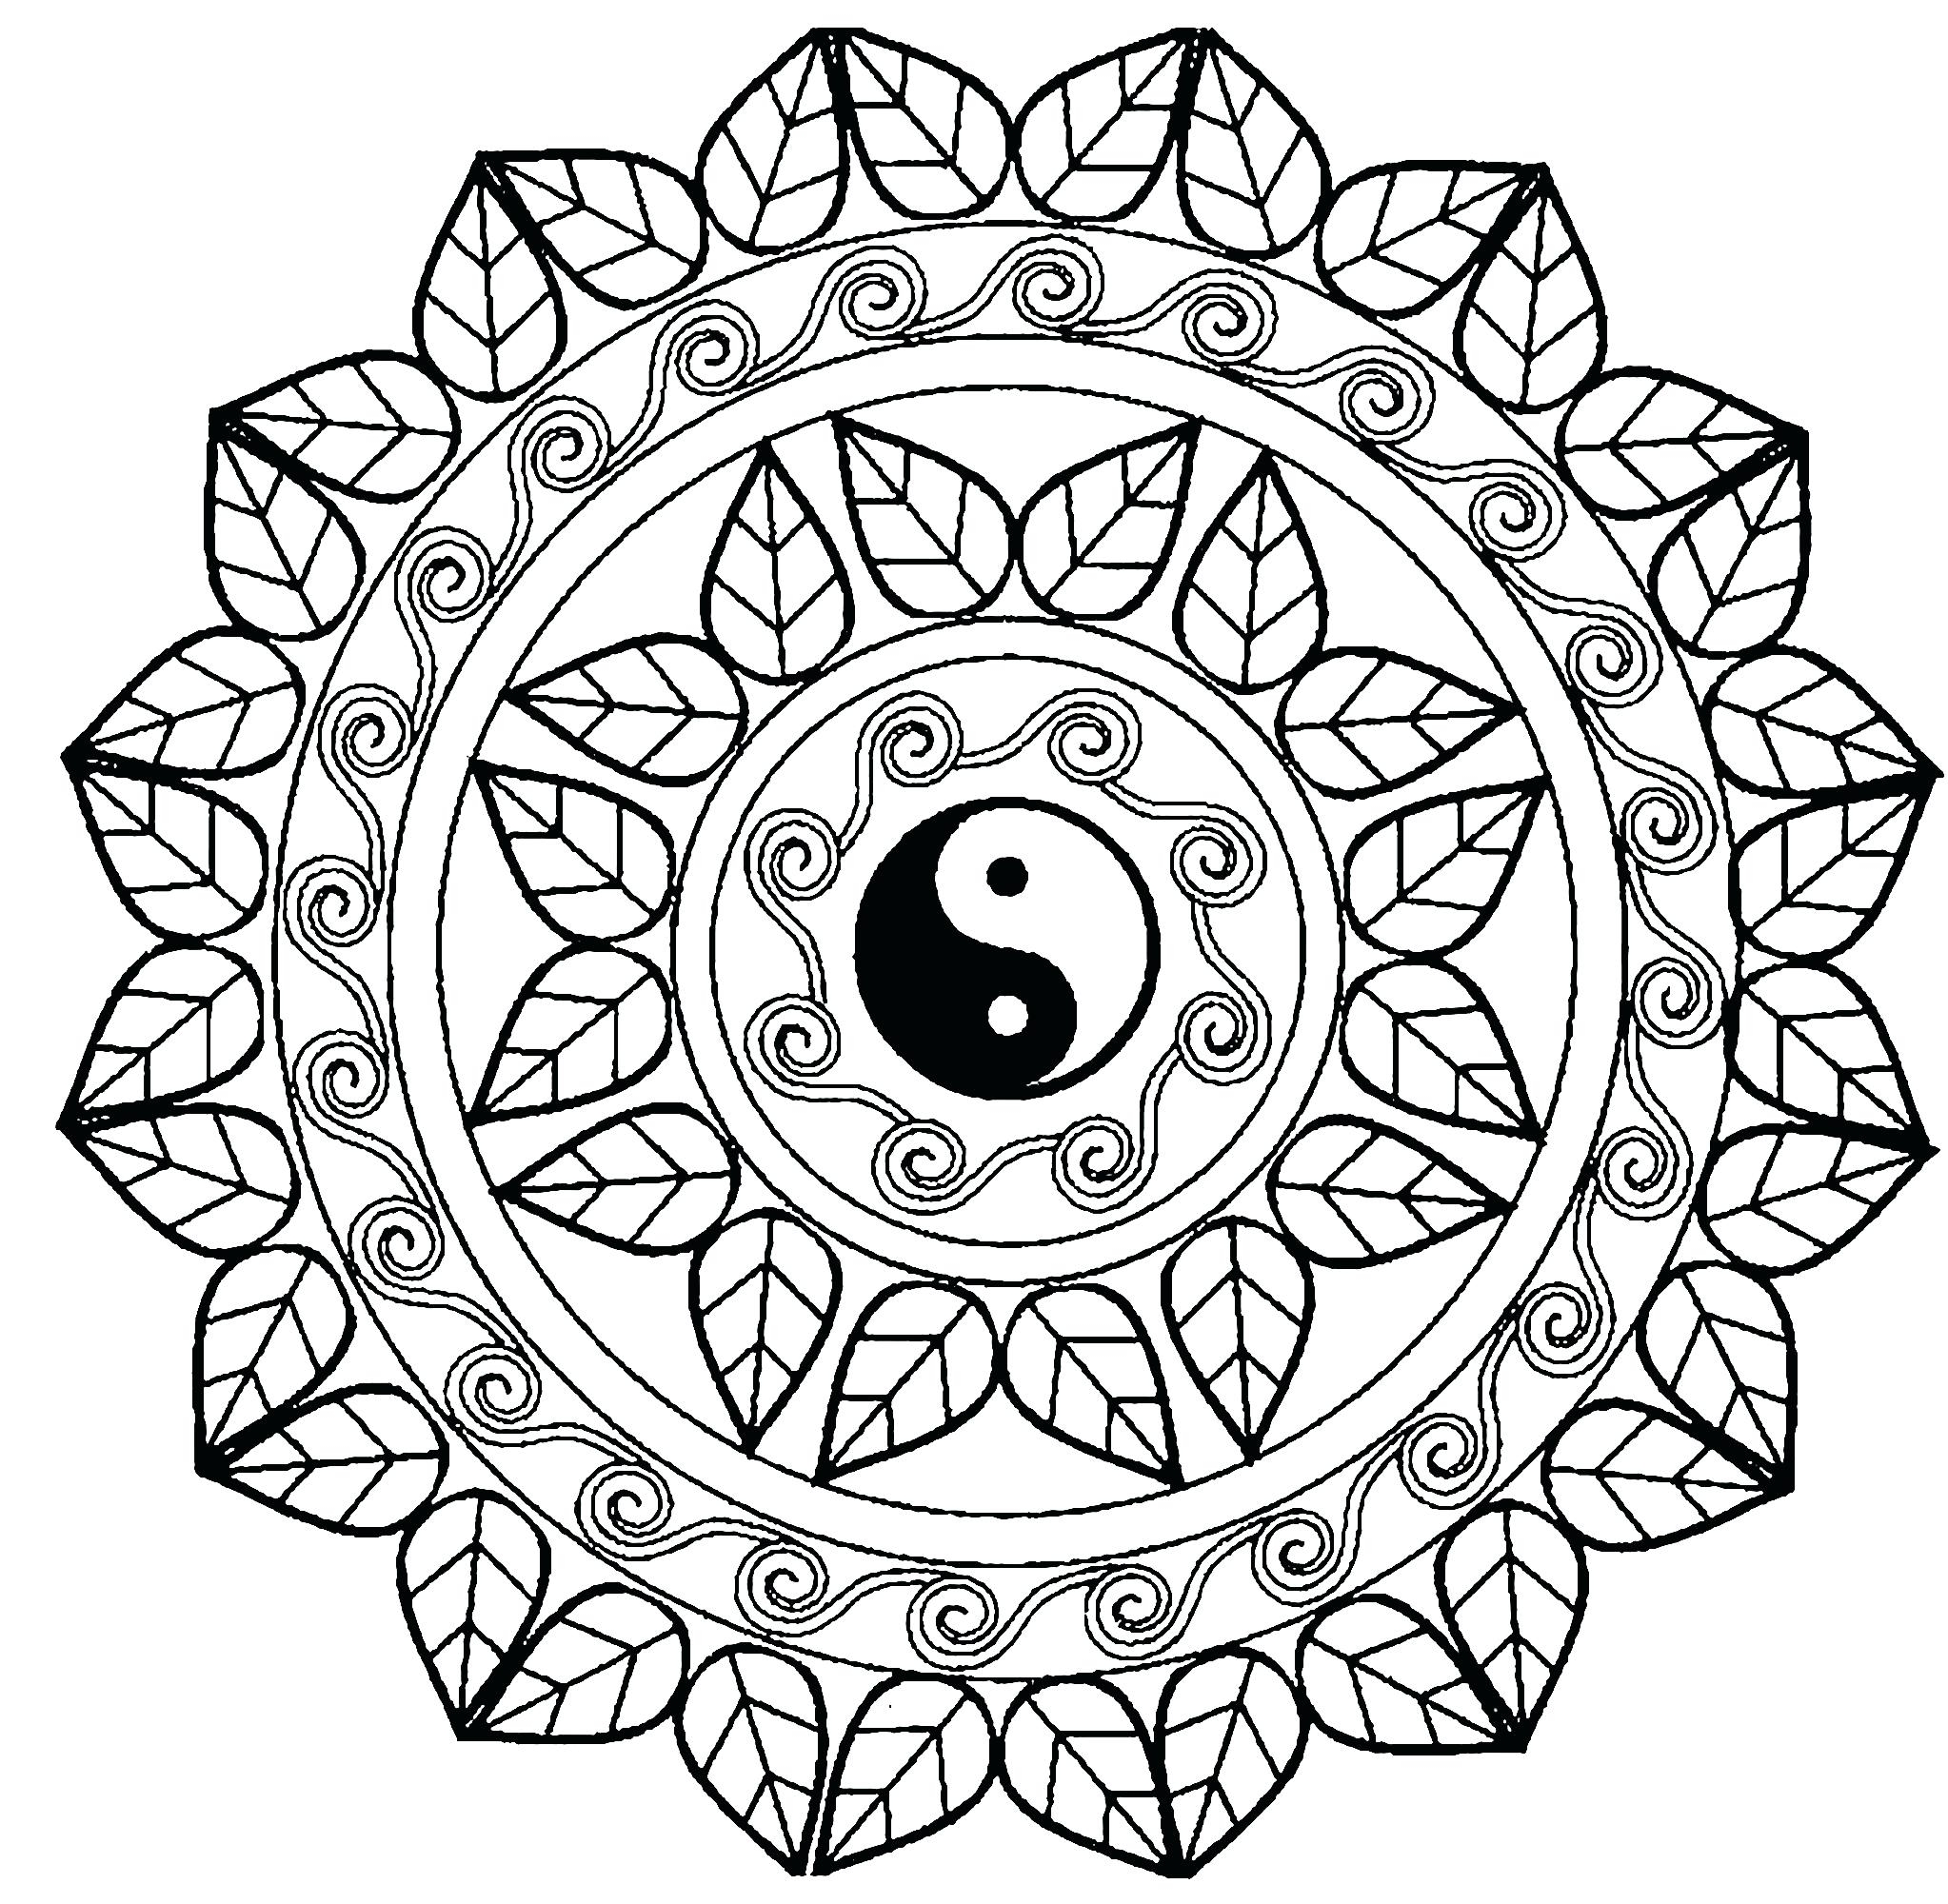 mandala-coloring-pages-advanced-level-printable-at-getcolorings